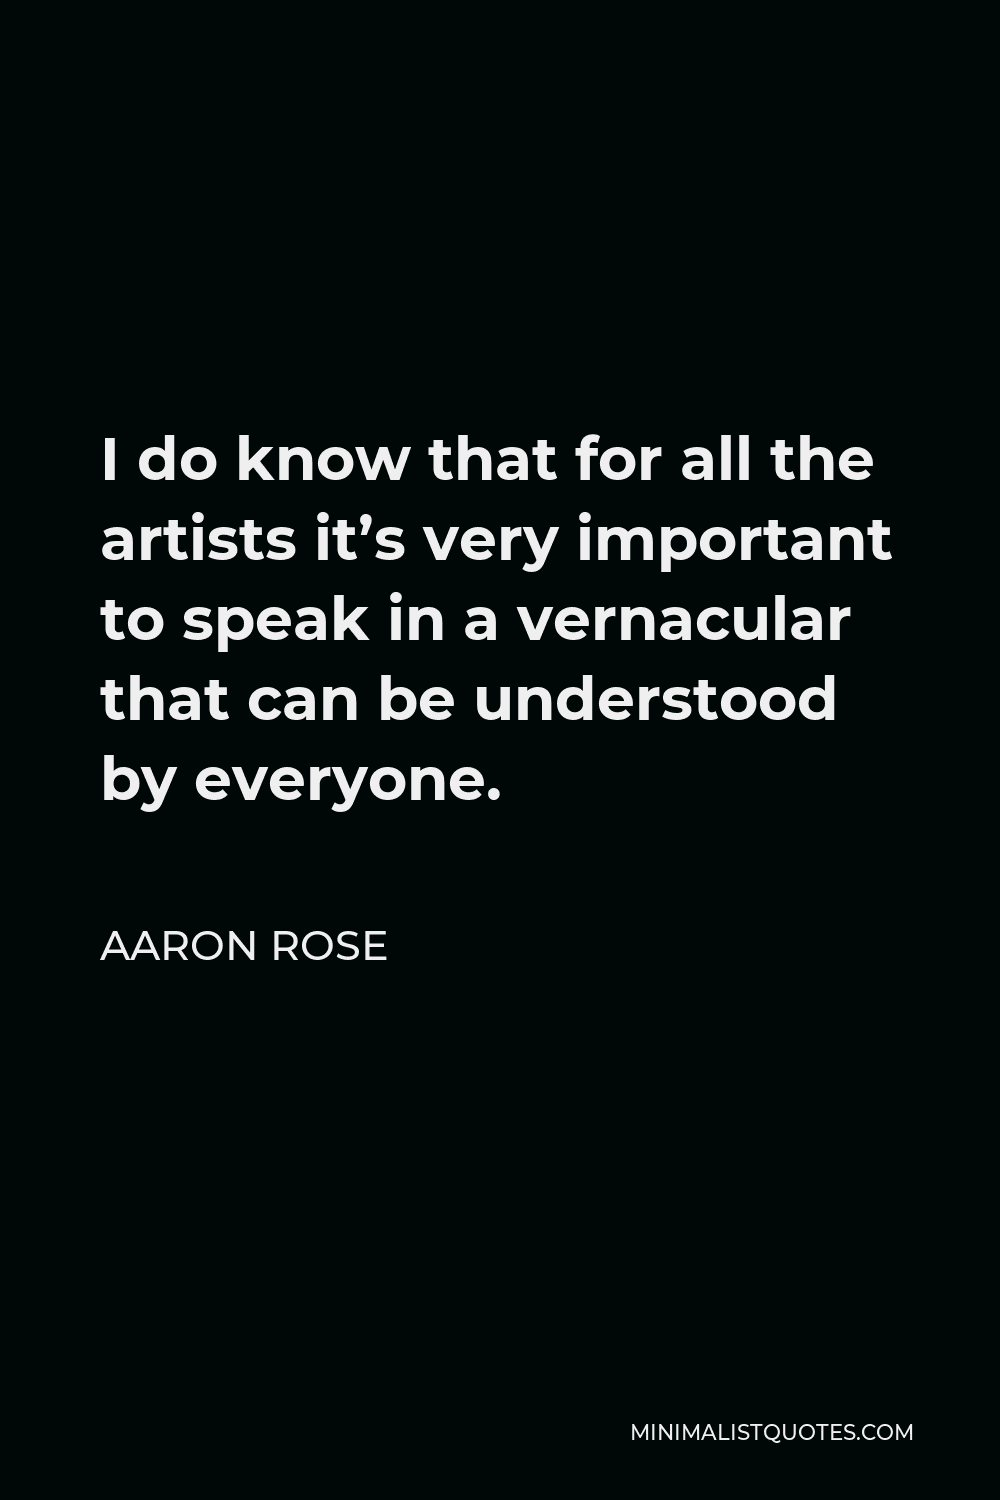 Aaron Rose Quote - I do know that for all the artists it’s very important to speak in a vernacular that can be understood by everyone.